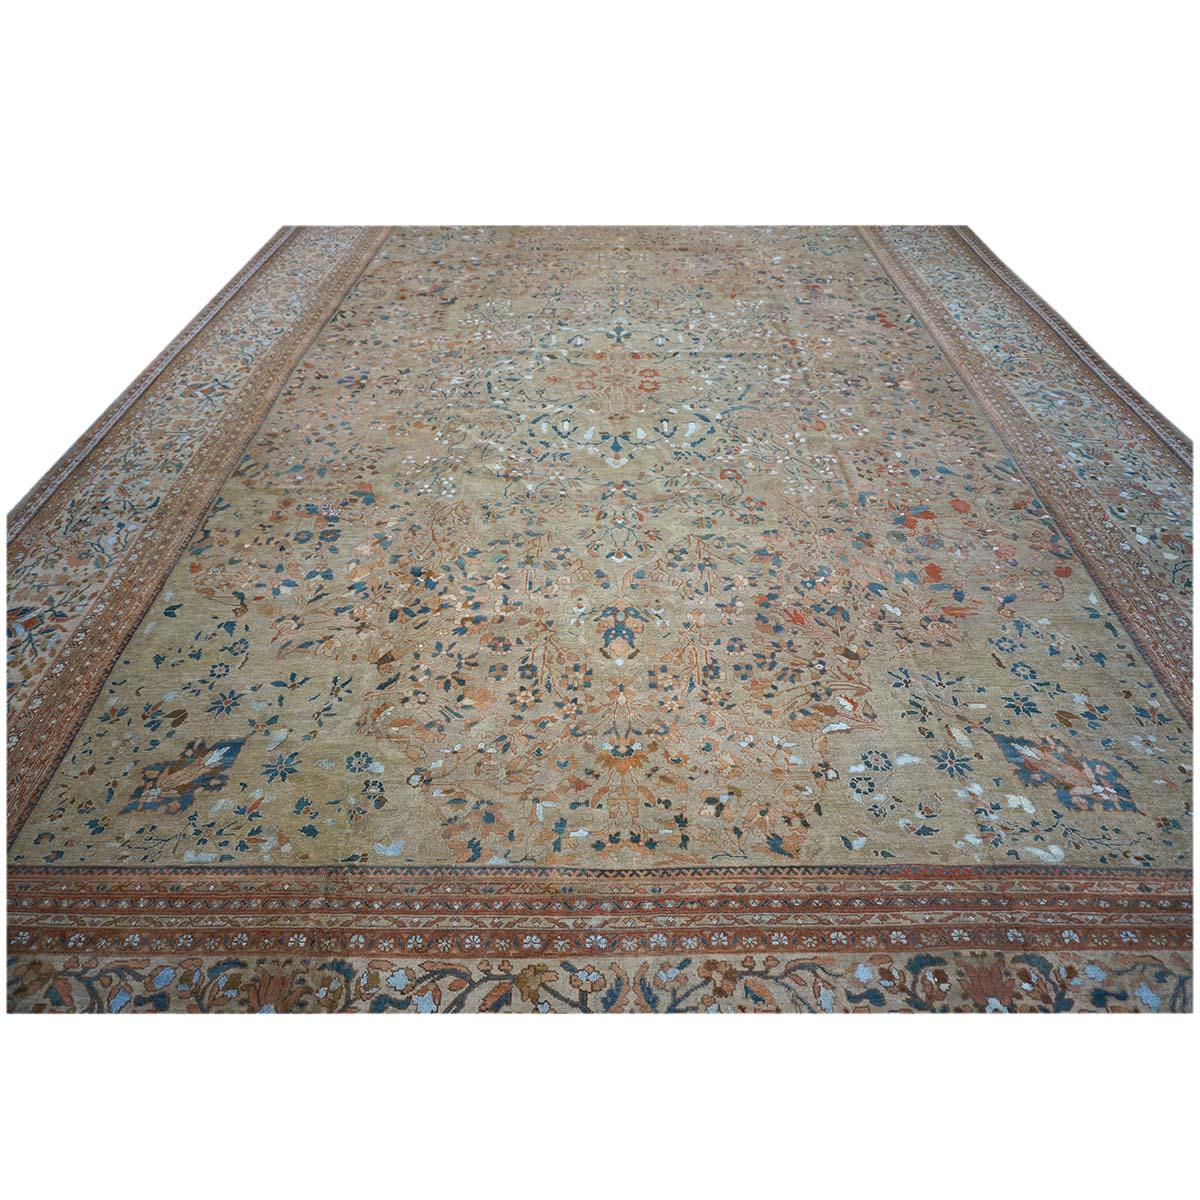 Wool 1870s Antique Persian Ziegler Sultanabad 15x21 Tan, Rust, & Light Blue Area Rug For Sale